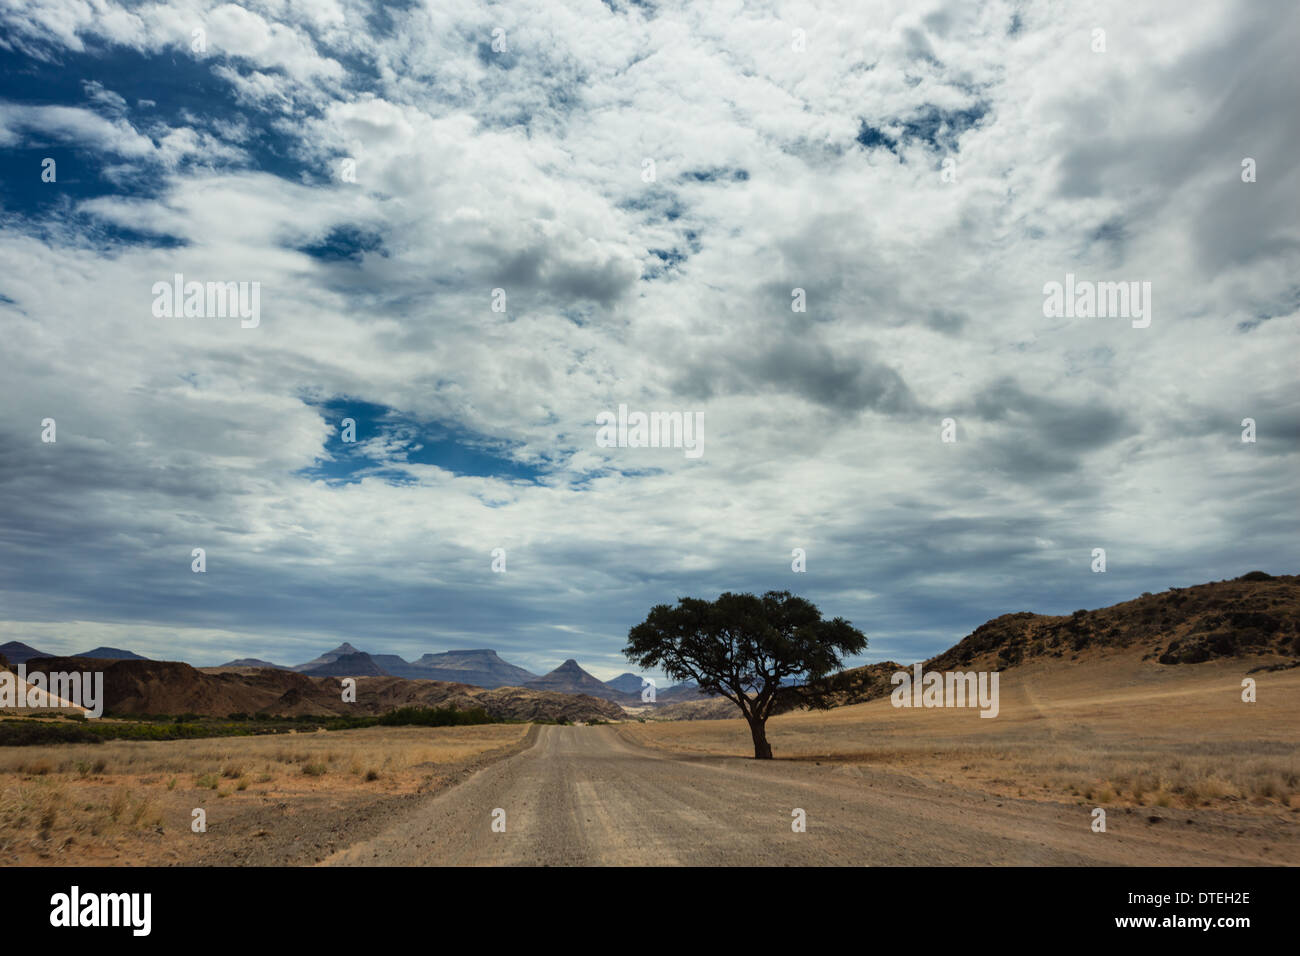 Single acacia tree lines edge of african road leading through the desert to the mountains Stock Photo